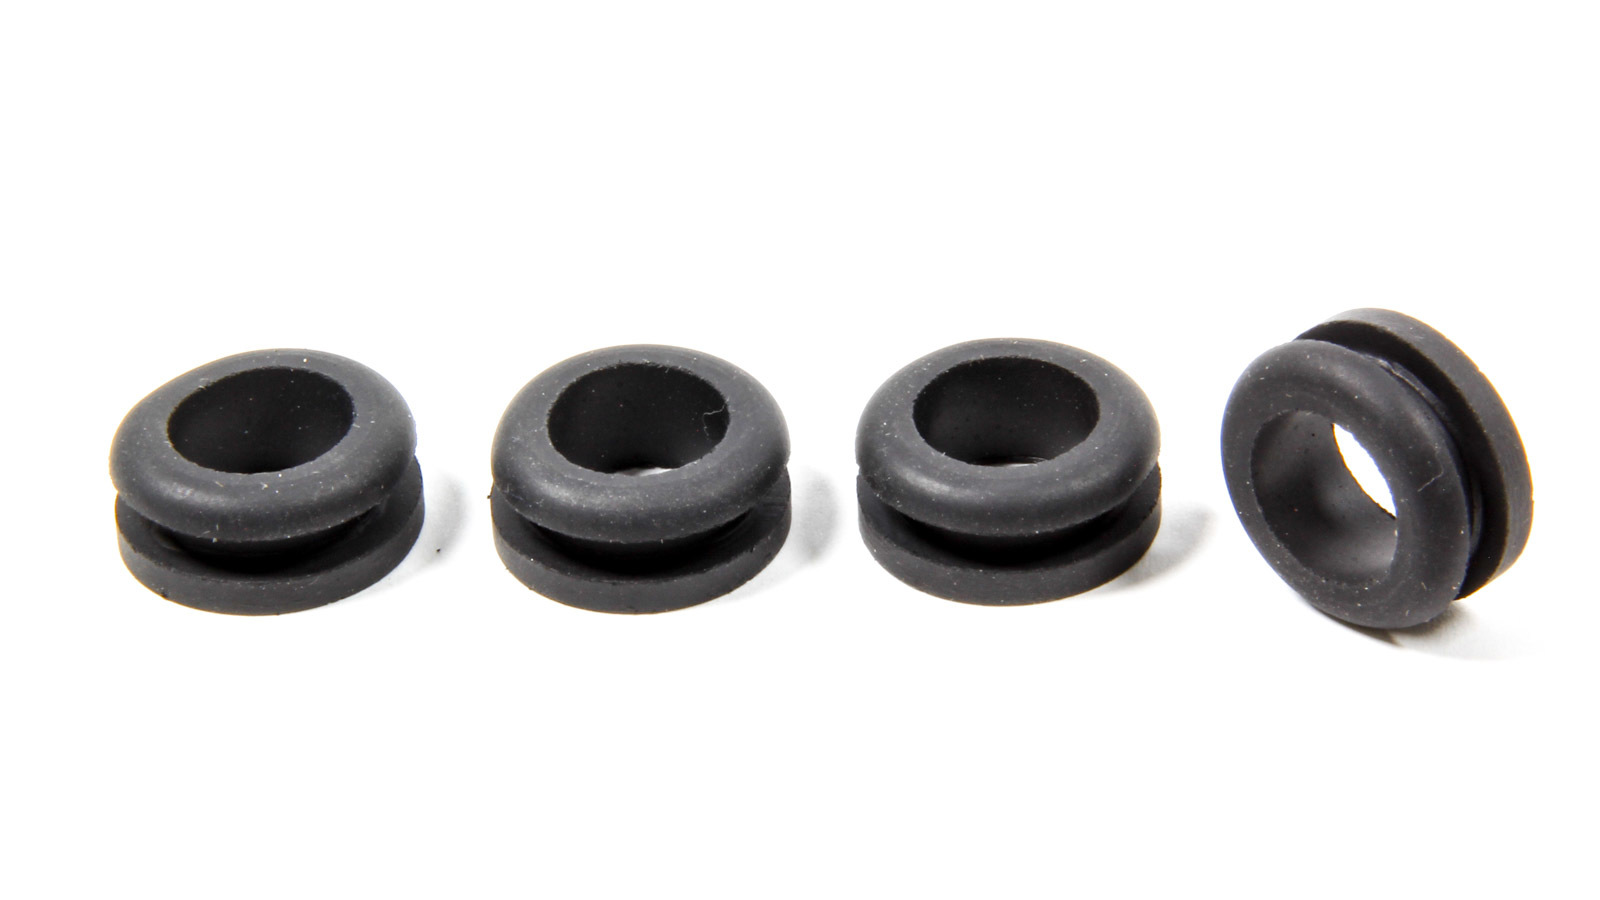 King Racing Products 3040 Tire Pressure Relief Valve Grommet, Rubber, Black, King Racing Products Tire Pressure Relief Valves, Set of 4